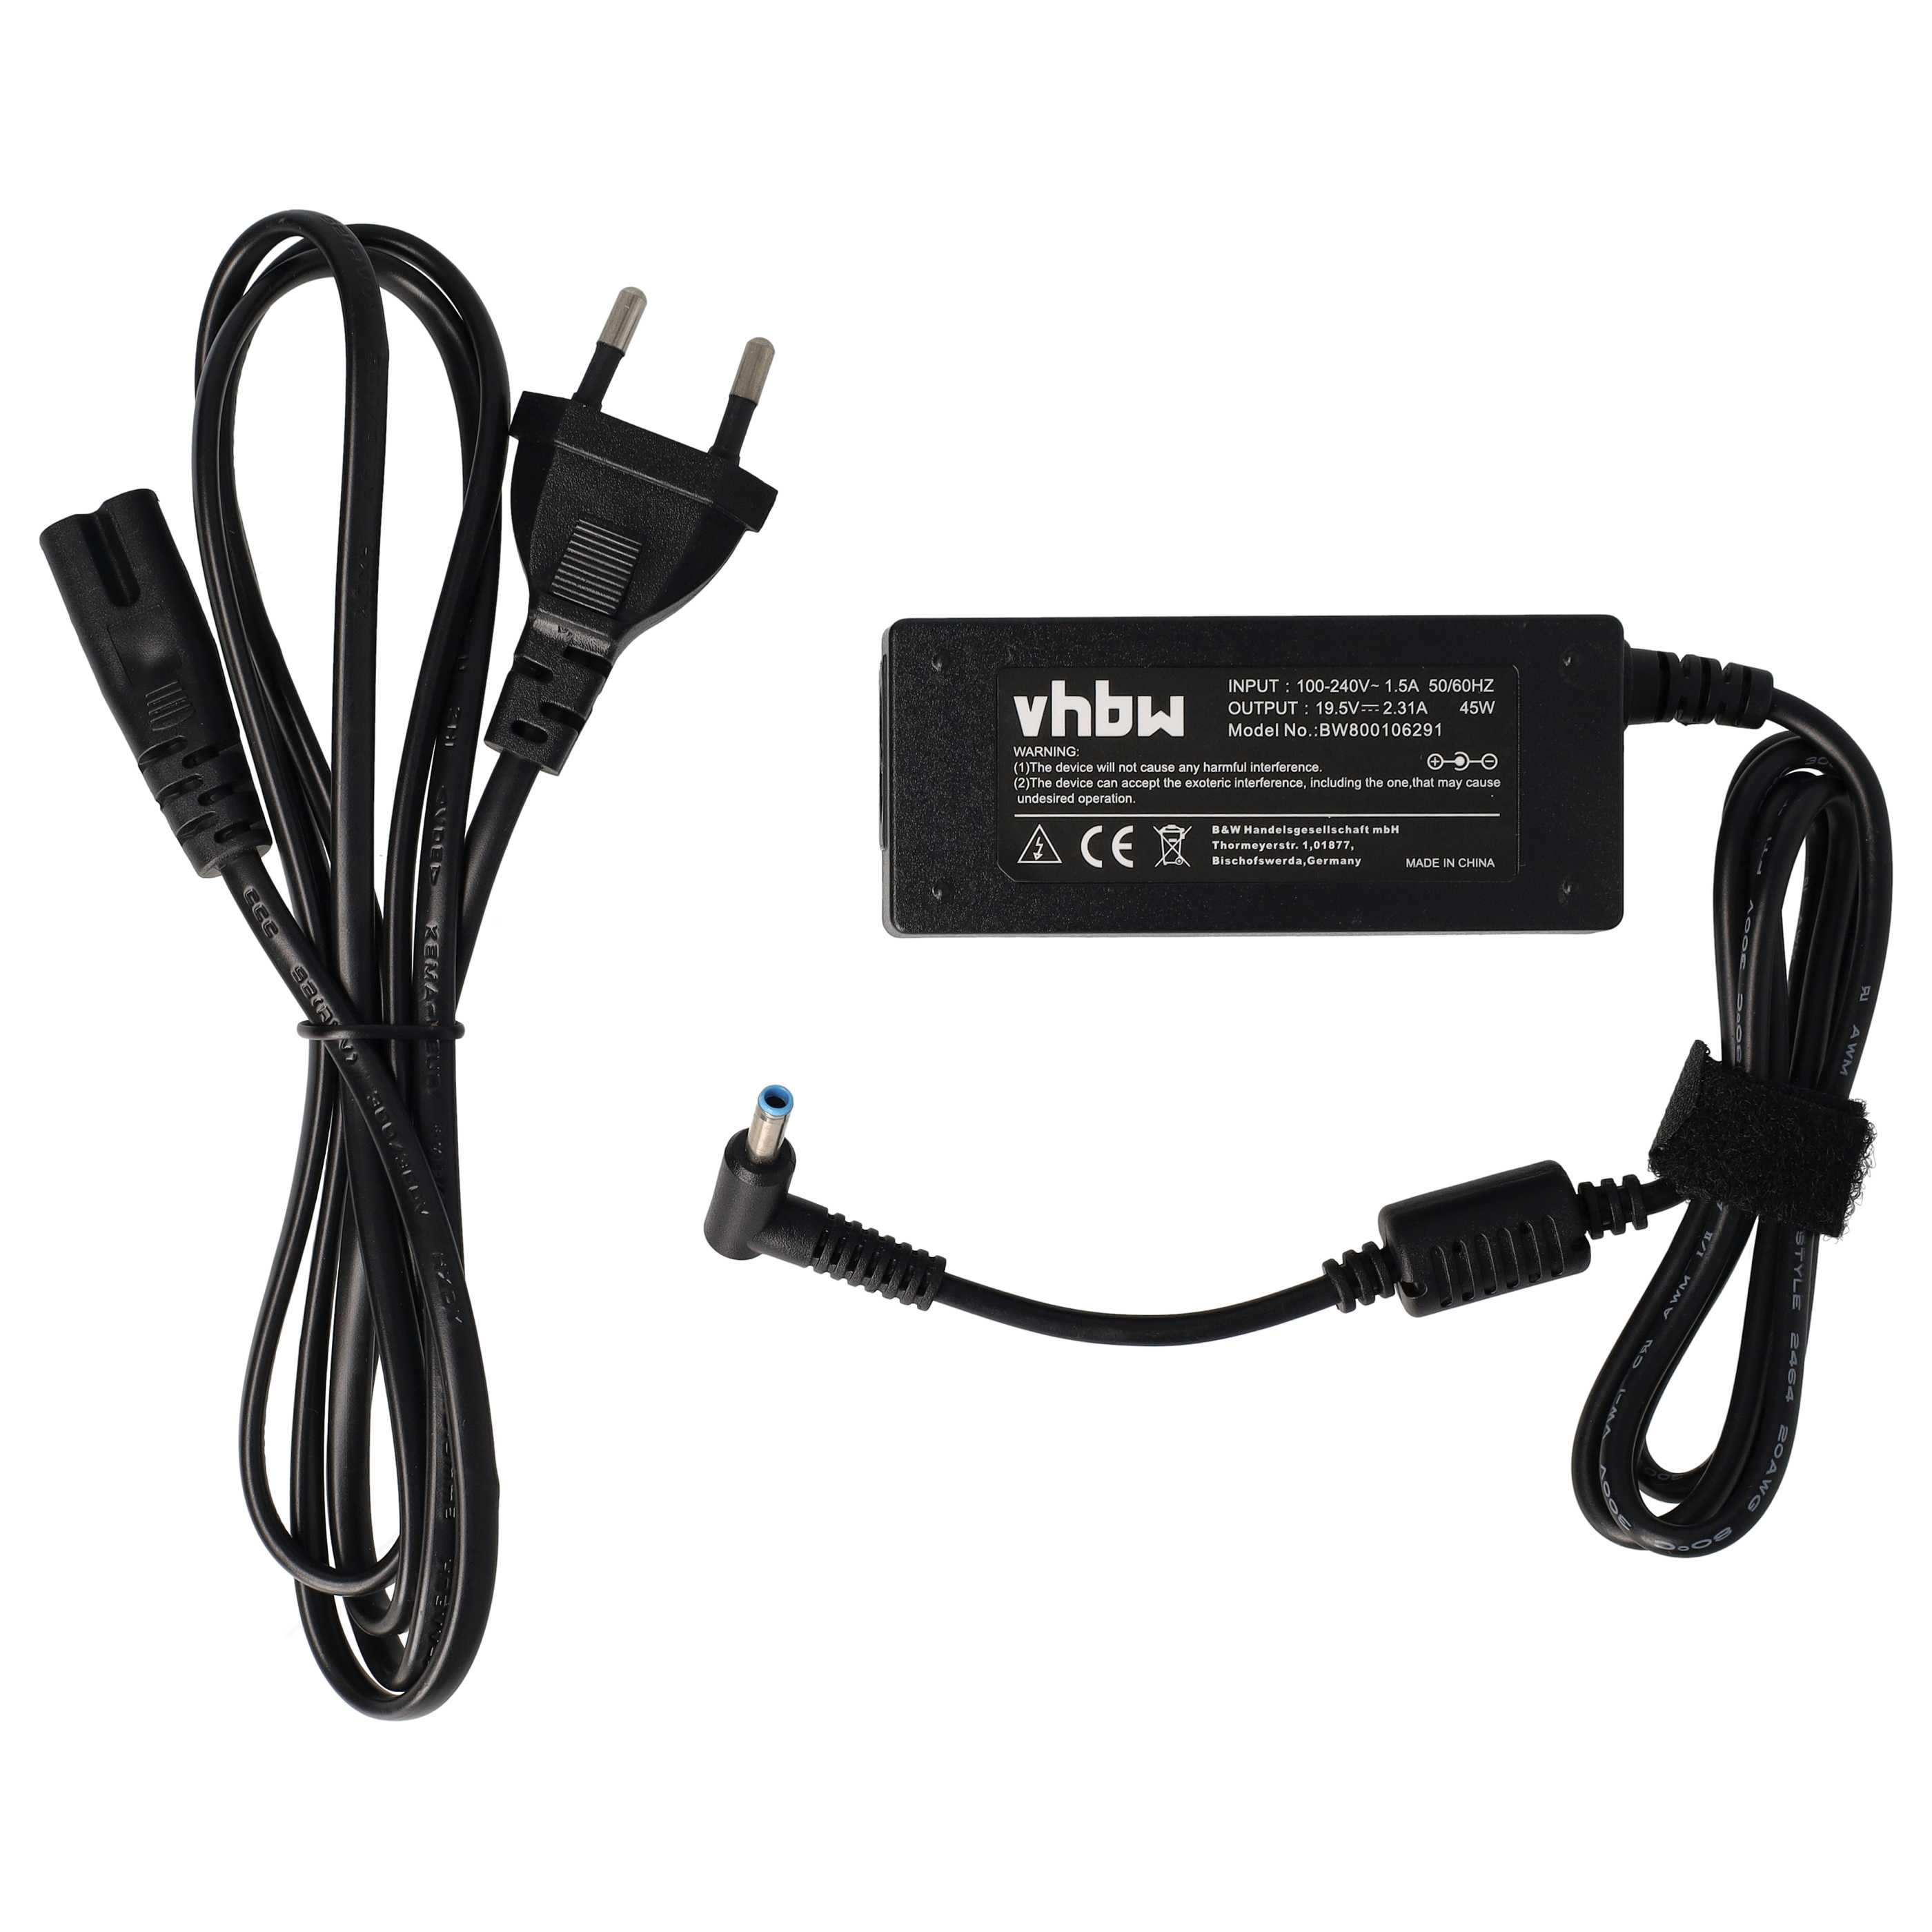 Mains Power Adapter replaces Dell 0CDF57, 04H6NV, 00285K, 03RG0T PA-1450-66D1 for HPNotebook etc., 45 W